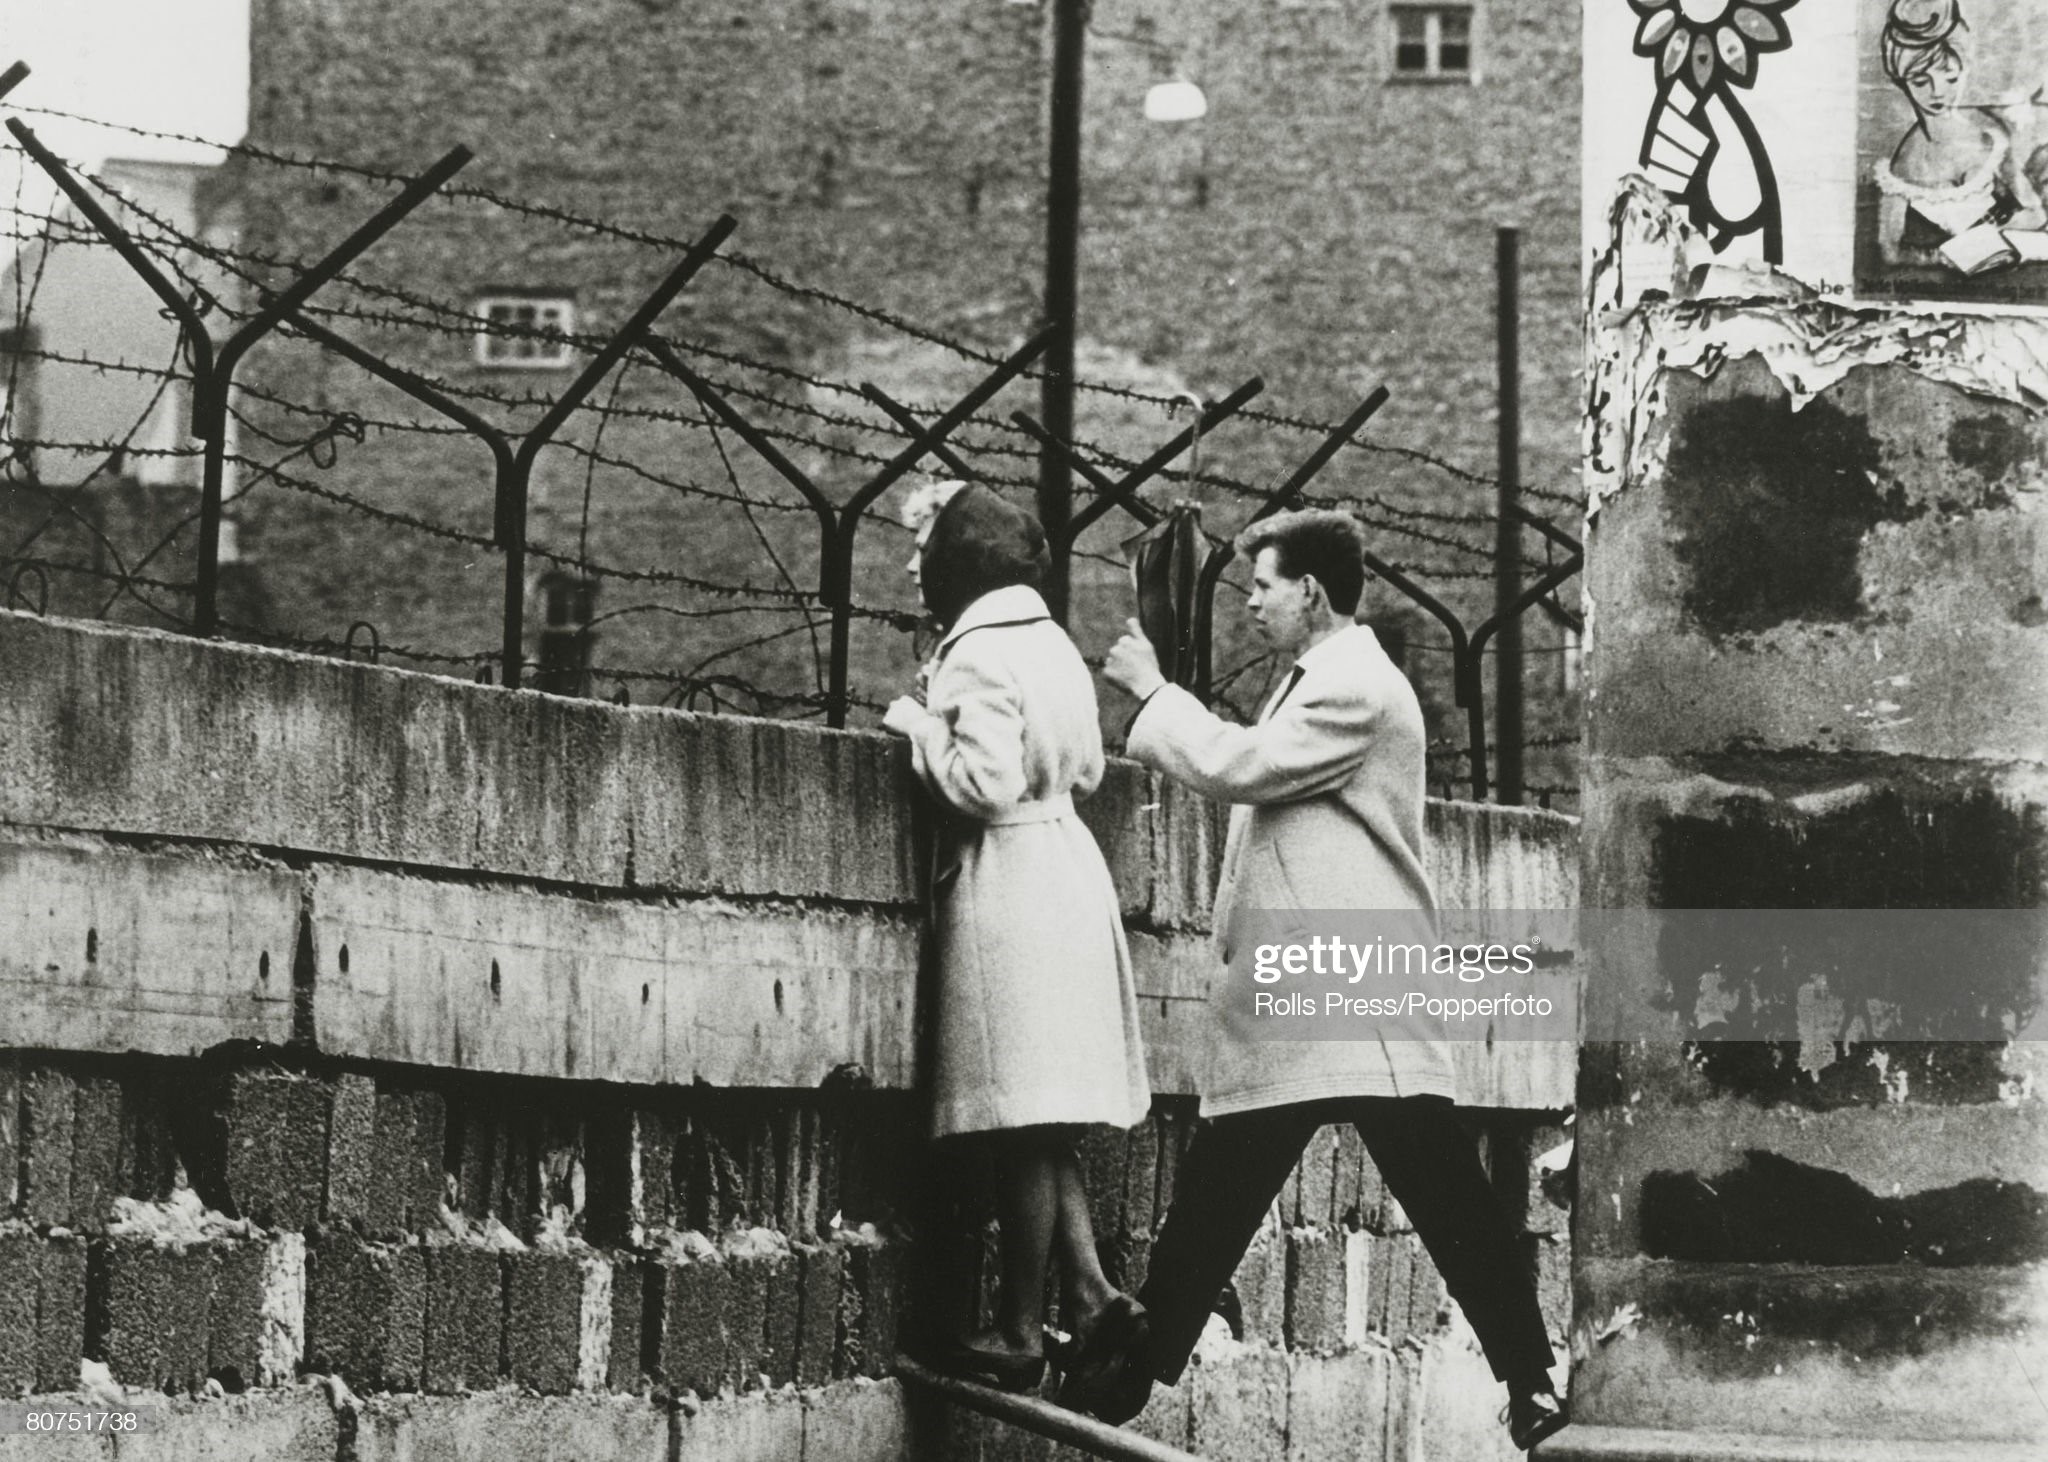 April 1962, a West Berlin girl accompanied by her boyfriend stands precariously, looking over the Berlin Wall to talk to her mother, a resident of East Berlin.